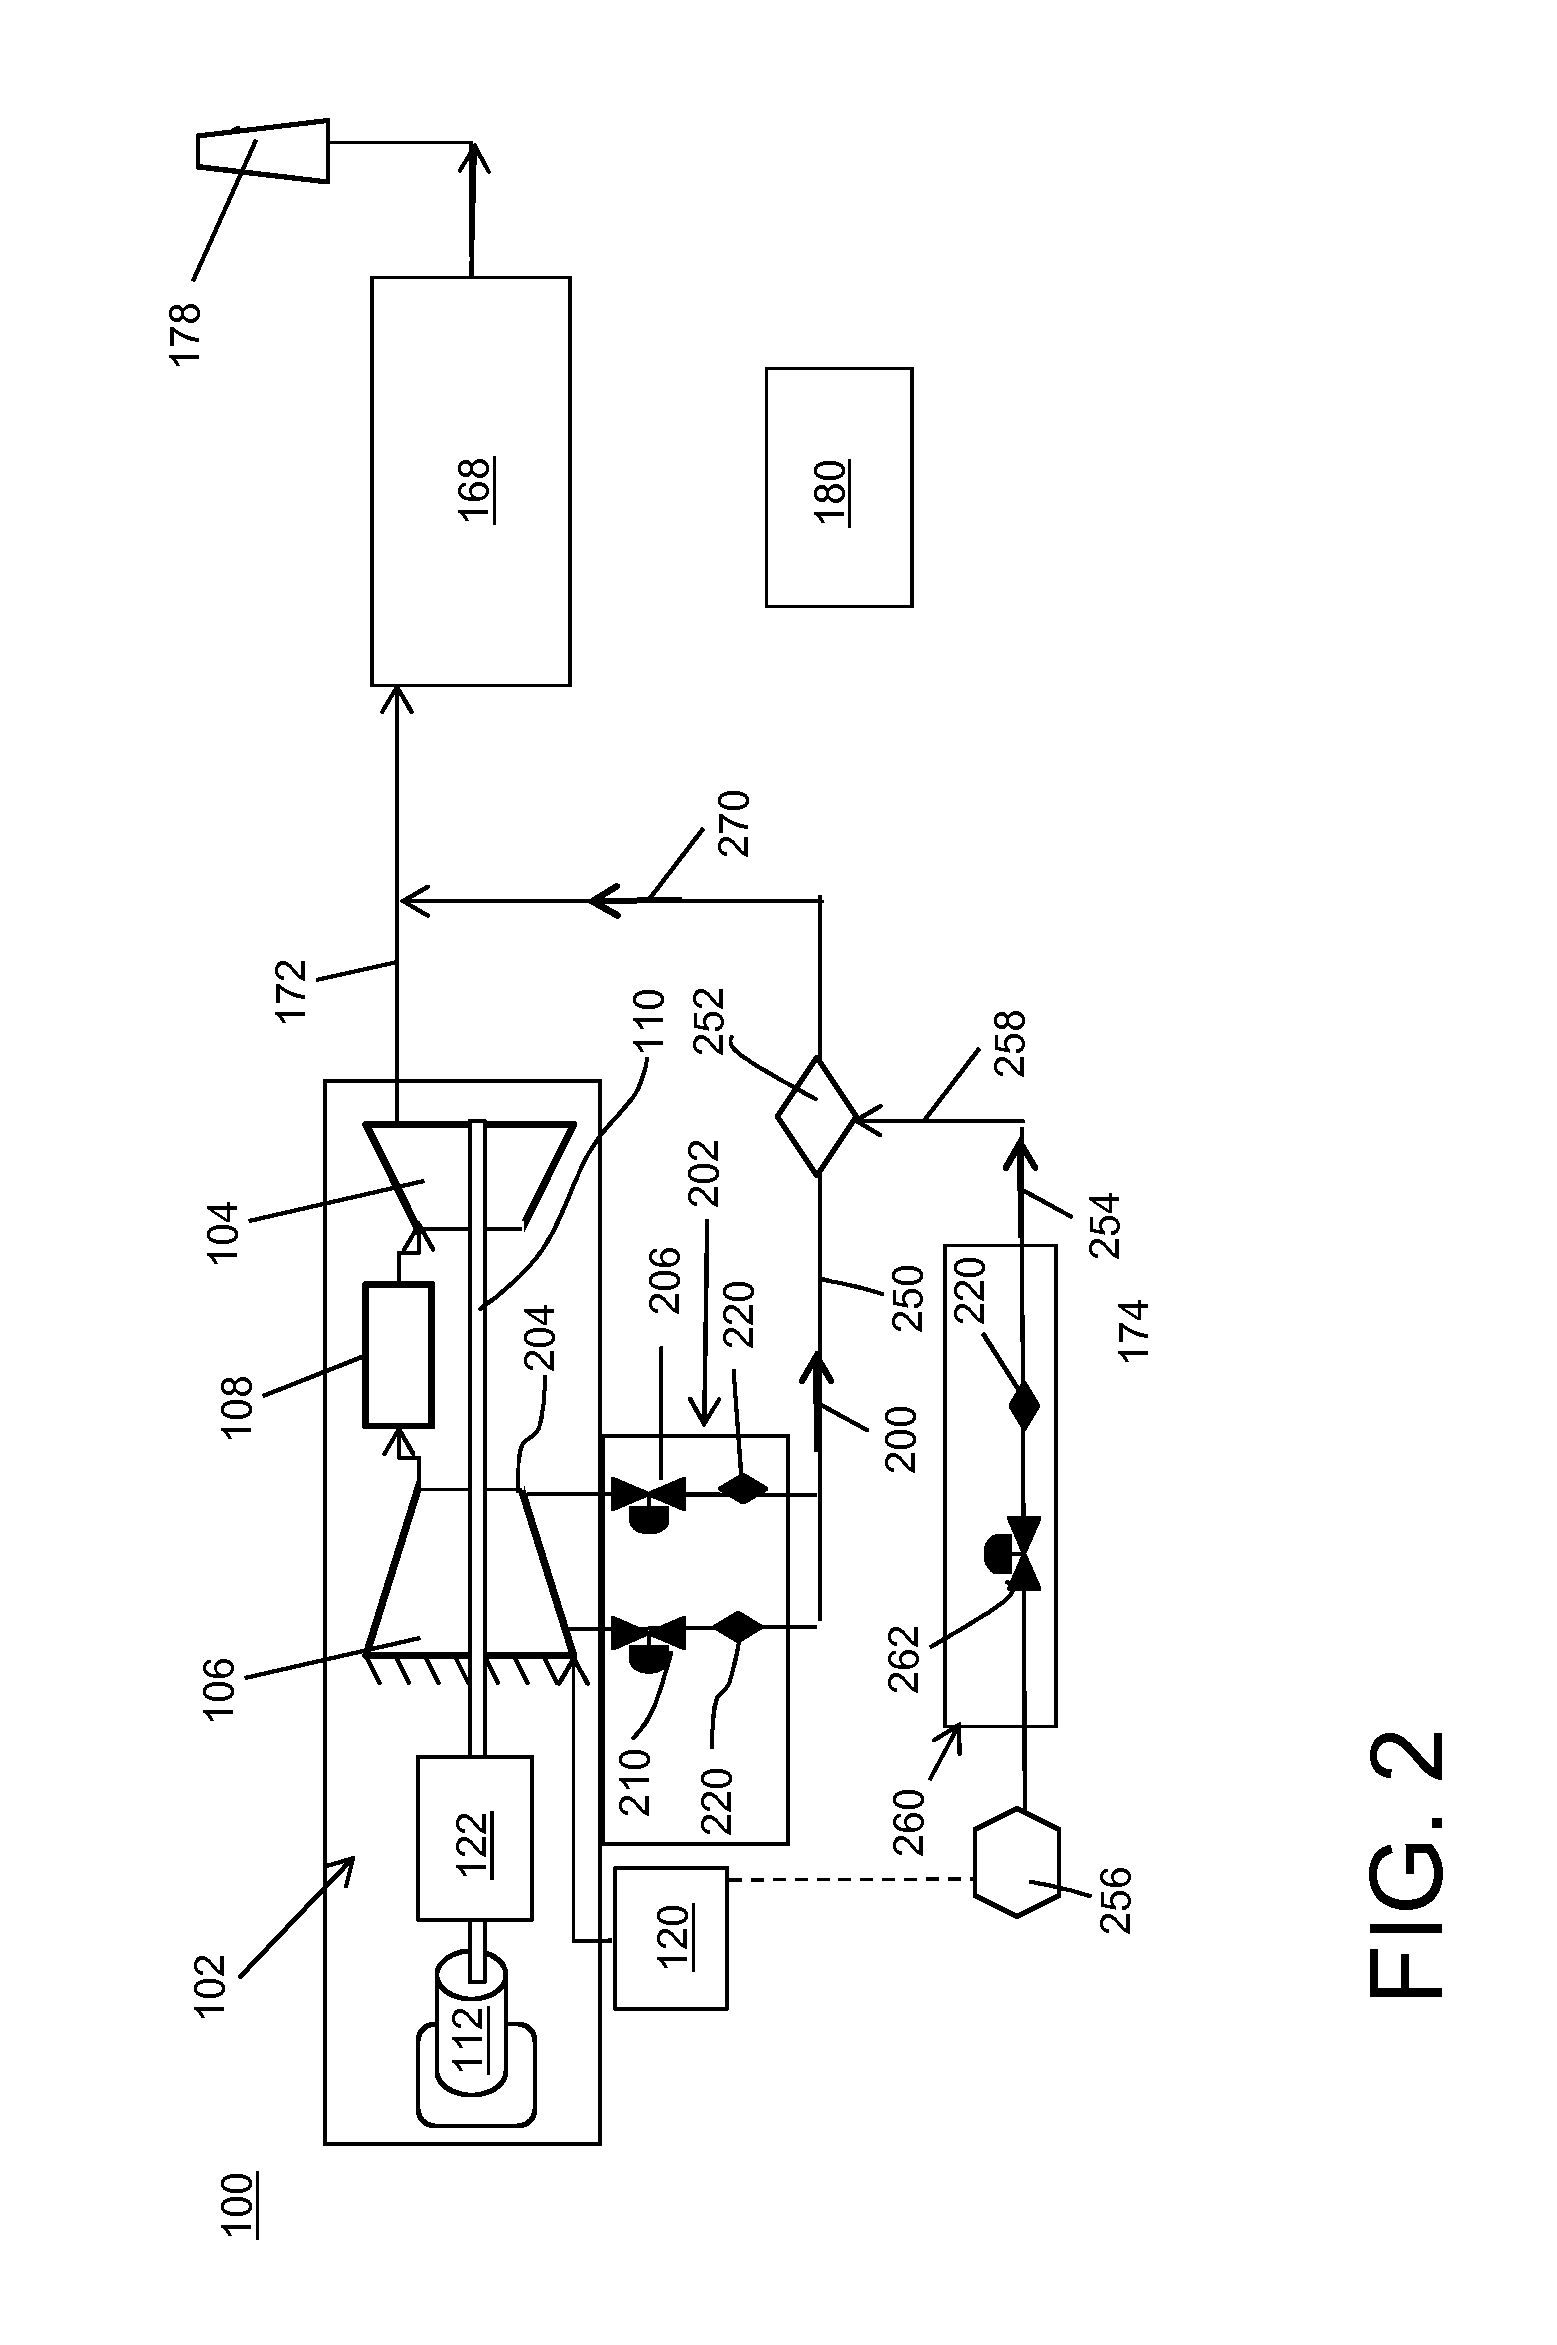 Power generation system having compressor creating excess air flow for scr unit